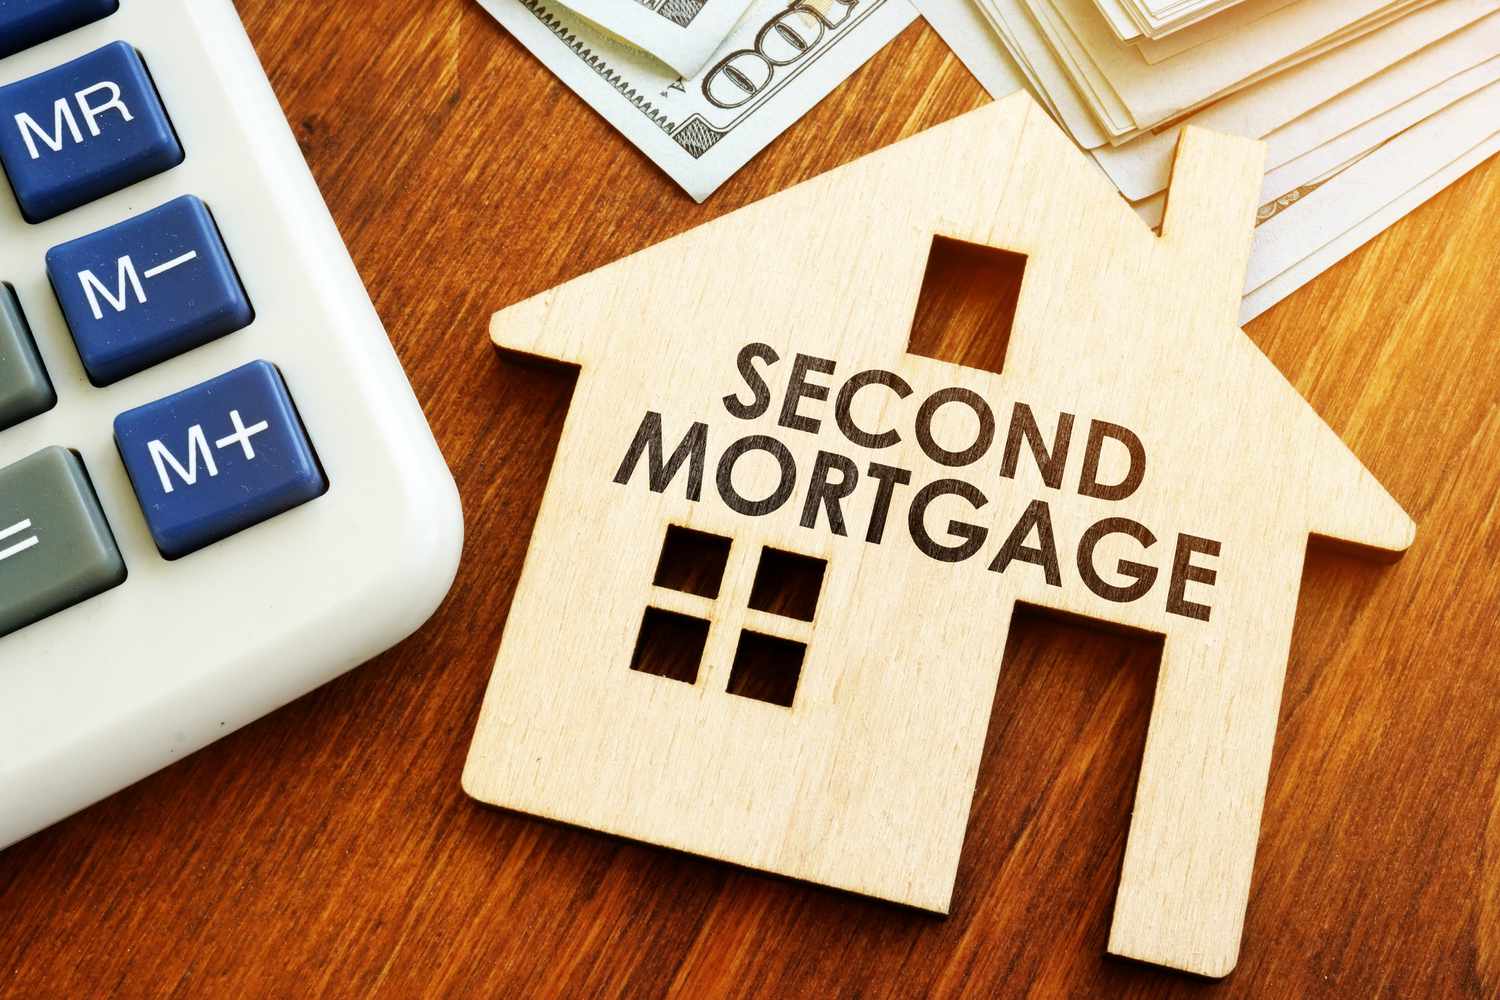 Introduce you to the fixed income second mortgage